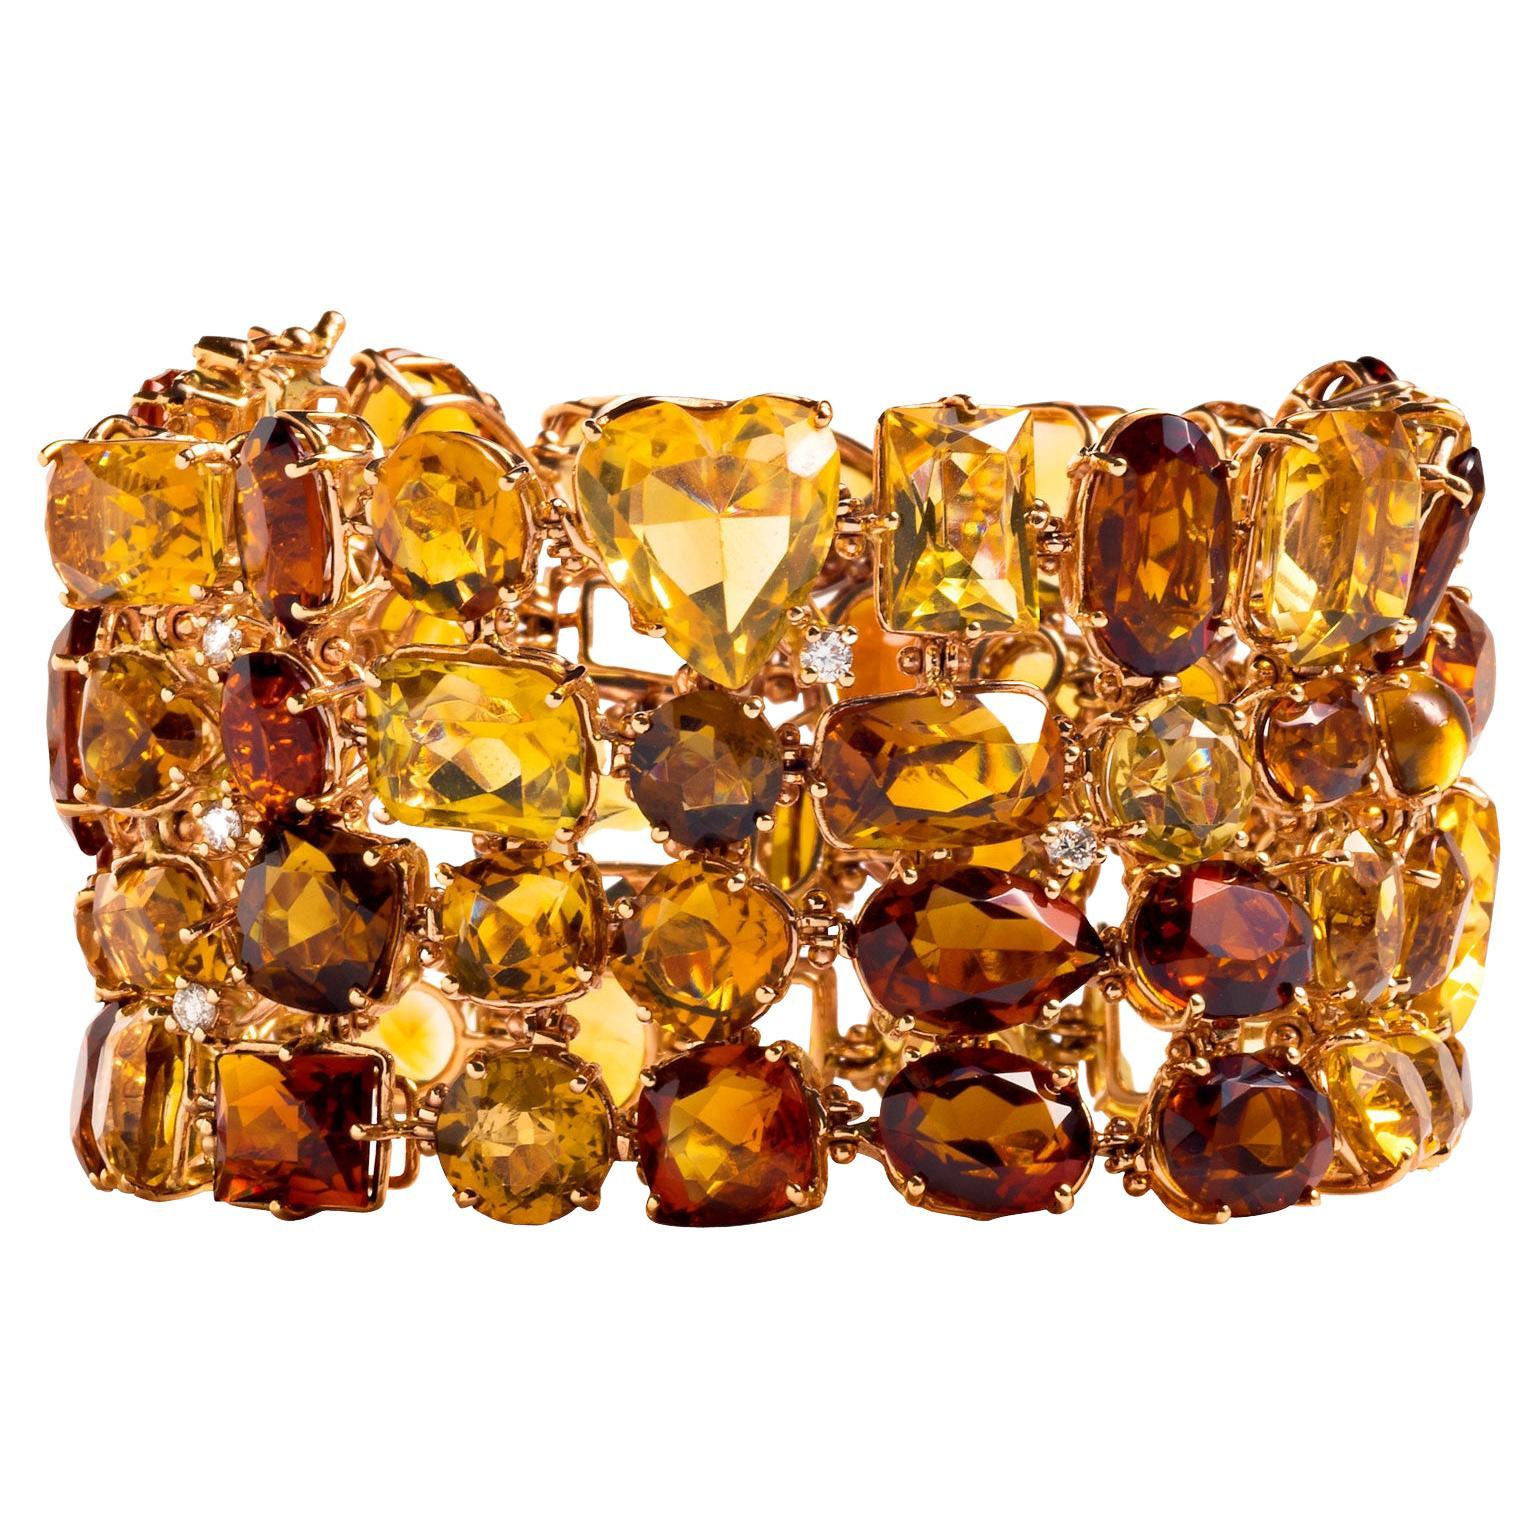 Sophisticated shades of browns and yellows envelop the wrist with this statement-making gem set bracelet. At 207 carats, this one-of-a-kind wide bracelet is laden with multi-shaped citrines, including hearts, and set in rose gold. Half a carat of